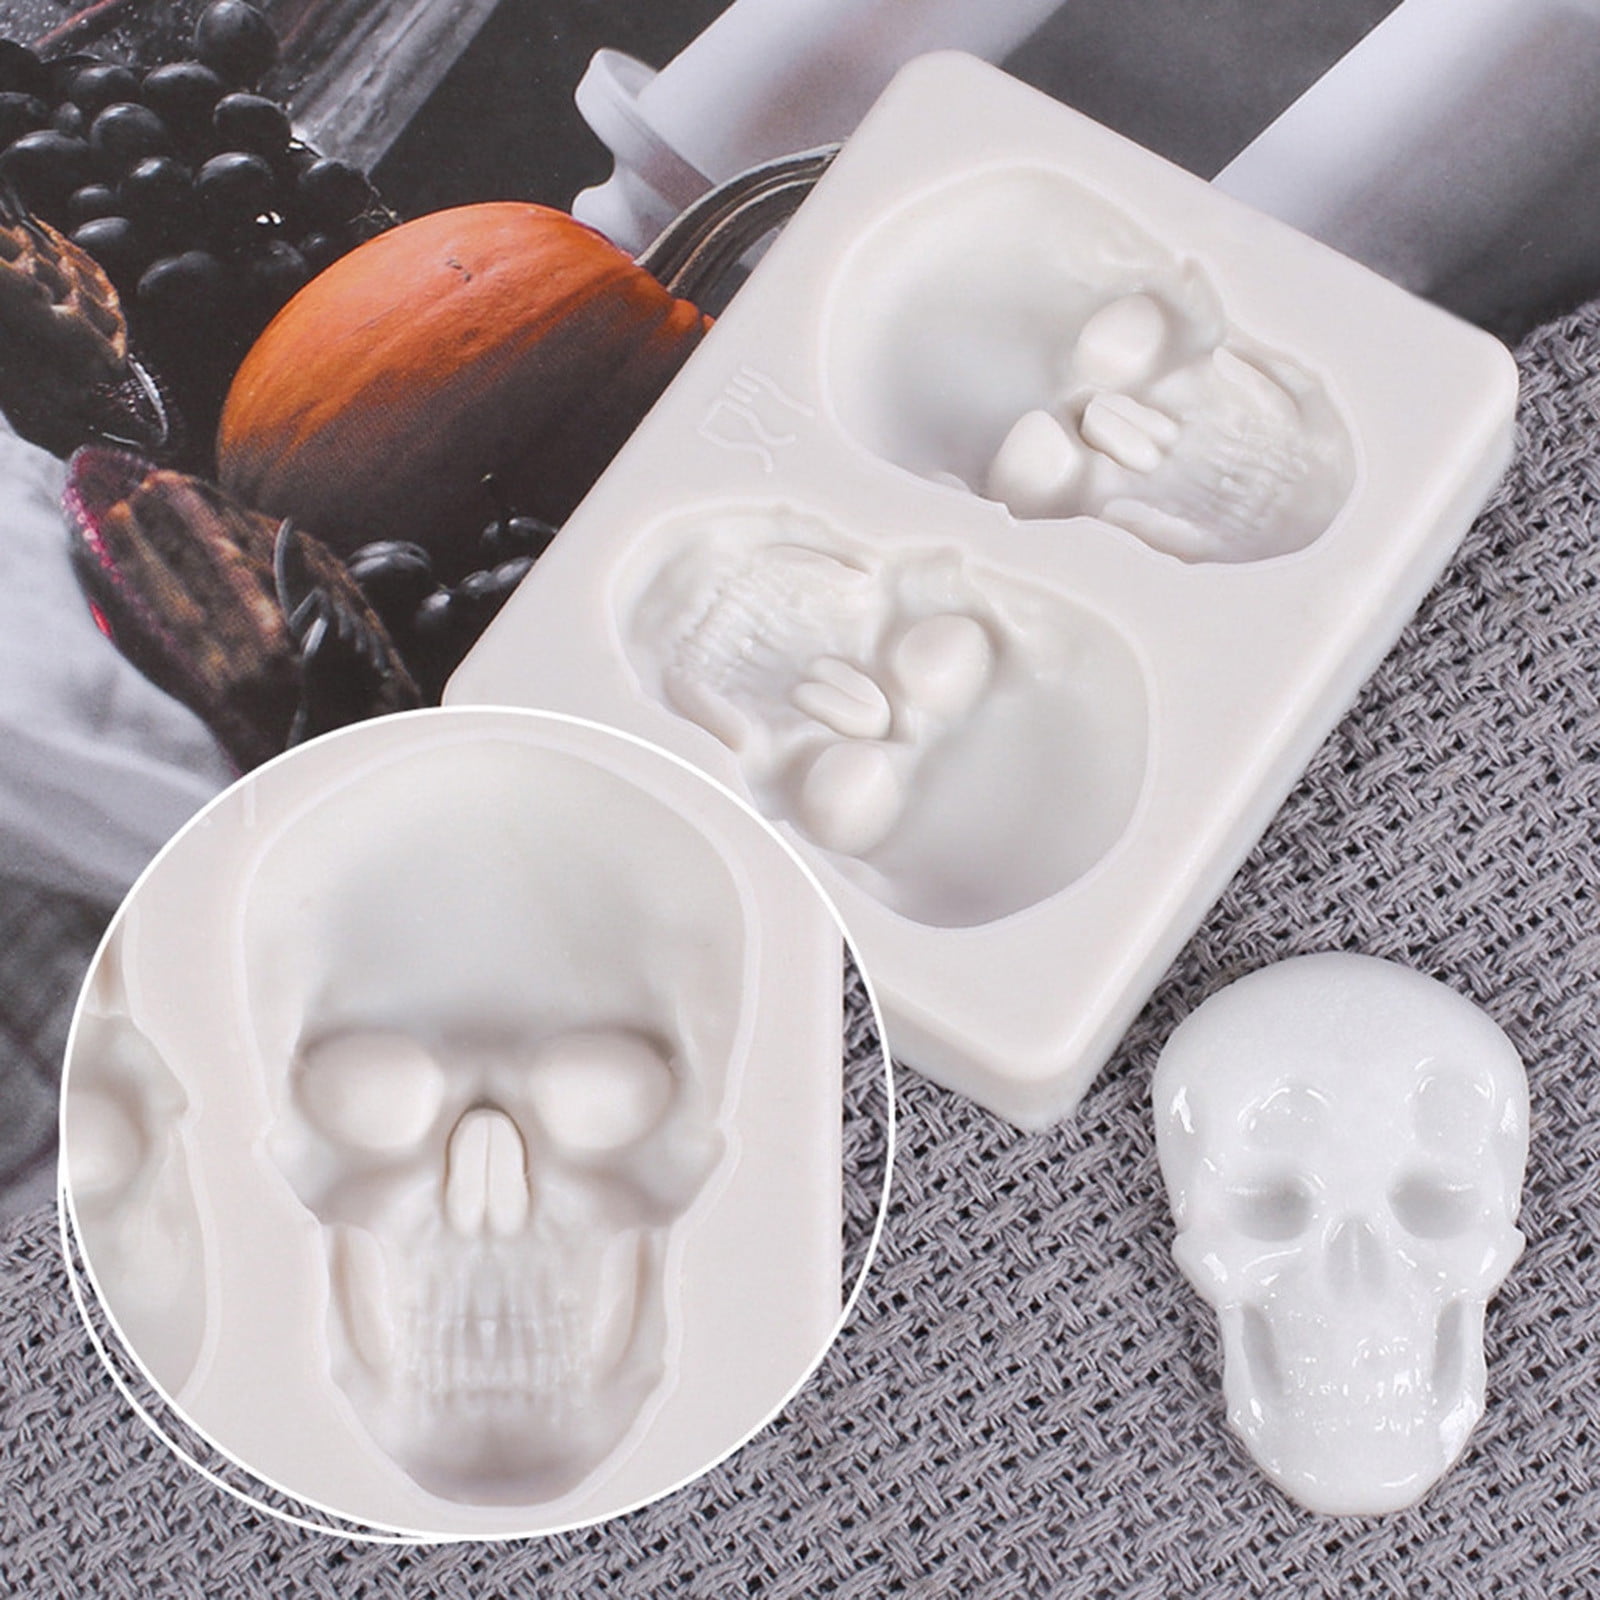 Herrnalise Gummy Skull Candy Molds Silicone,40 Cavity Non-Stick Skull Silicone  Molds for Chocolate,Candy,Jelly,Ice Cube,Dog Treats etc. 